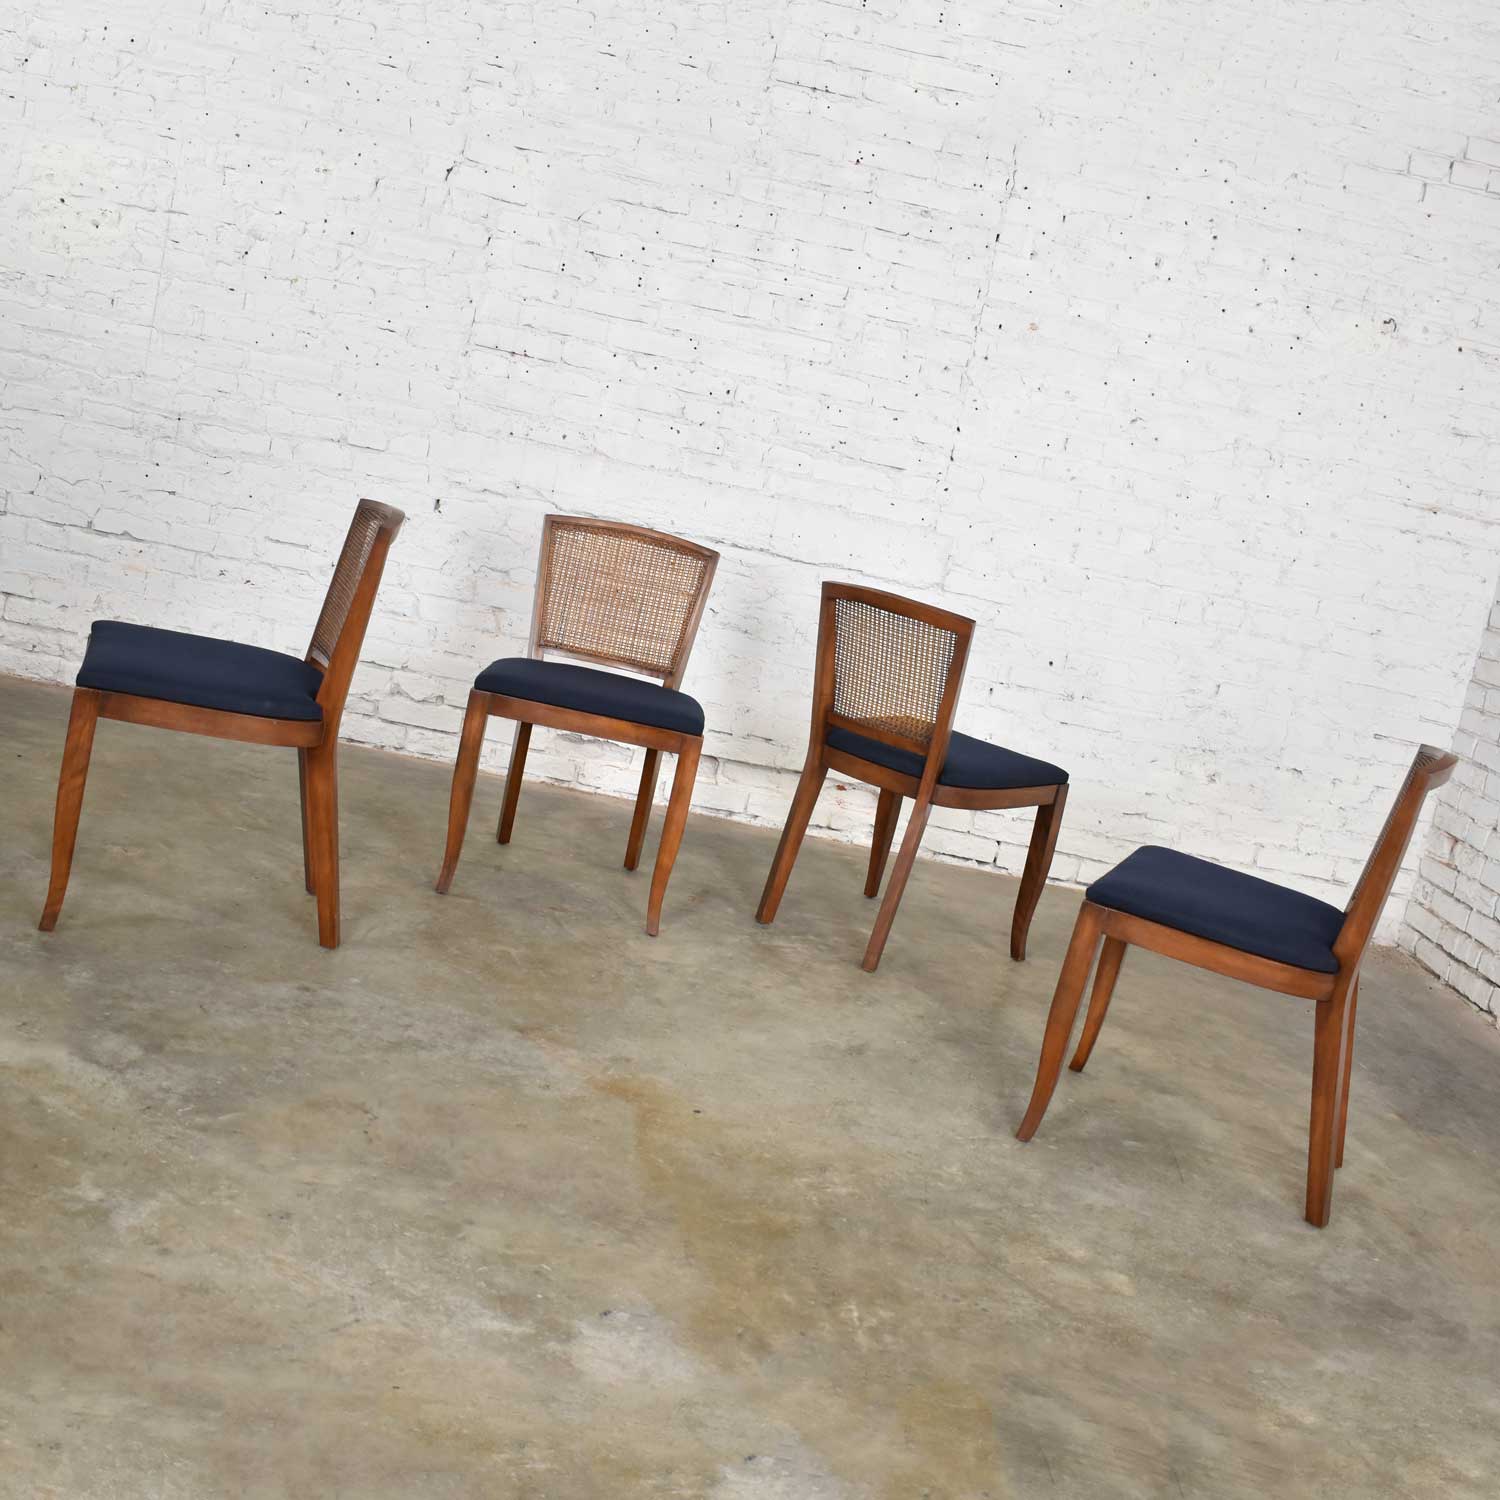 Vintage Mid-Century Modern Set of 4 Cane Back Dining Chairs Newly Upholstered Seats